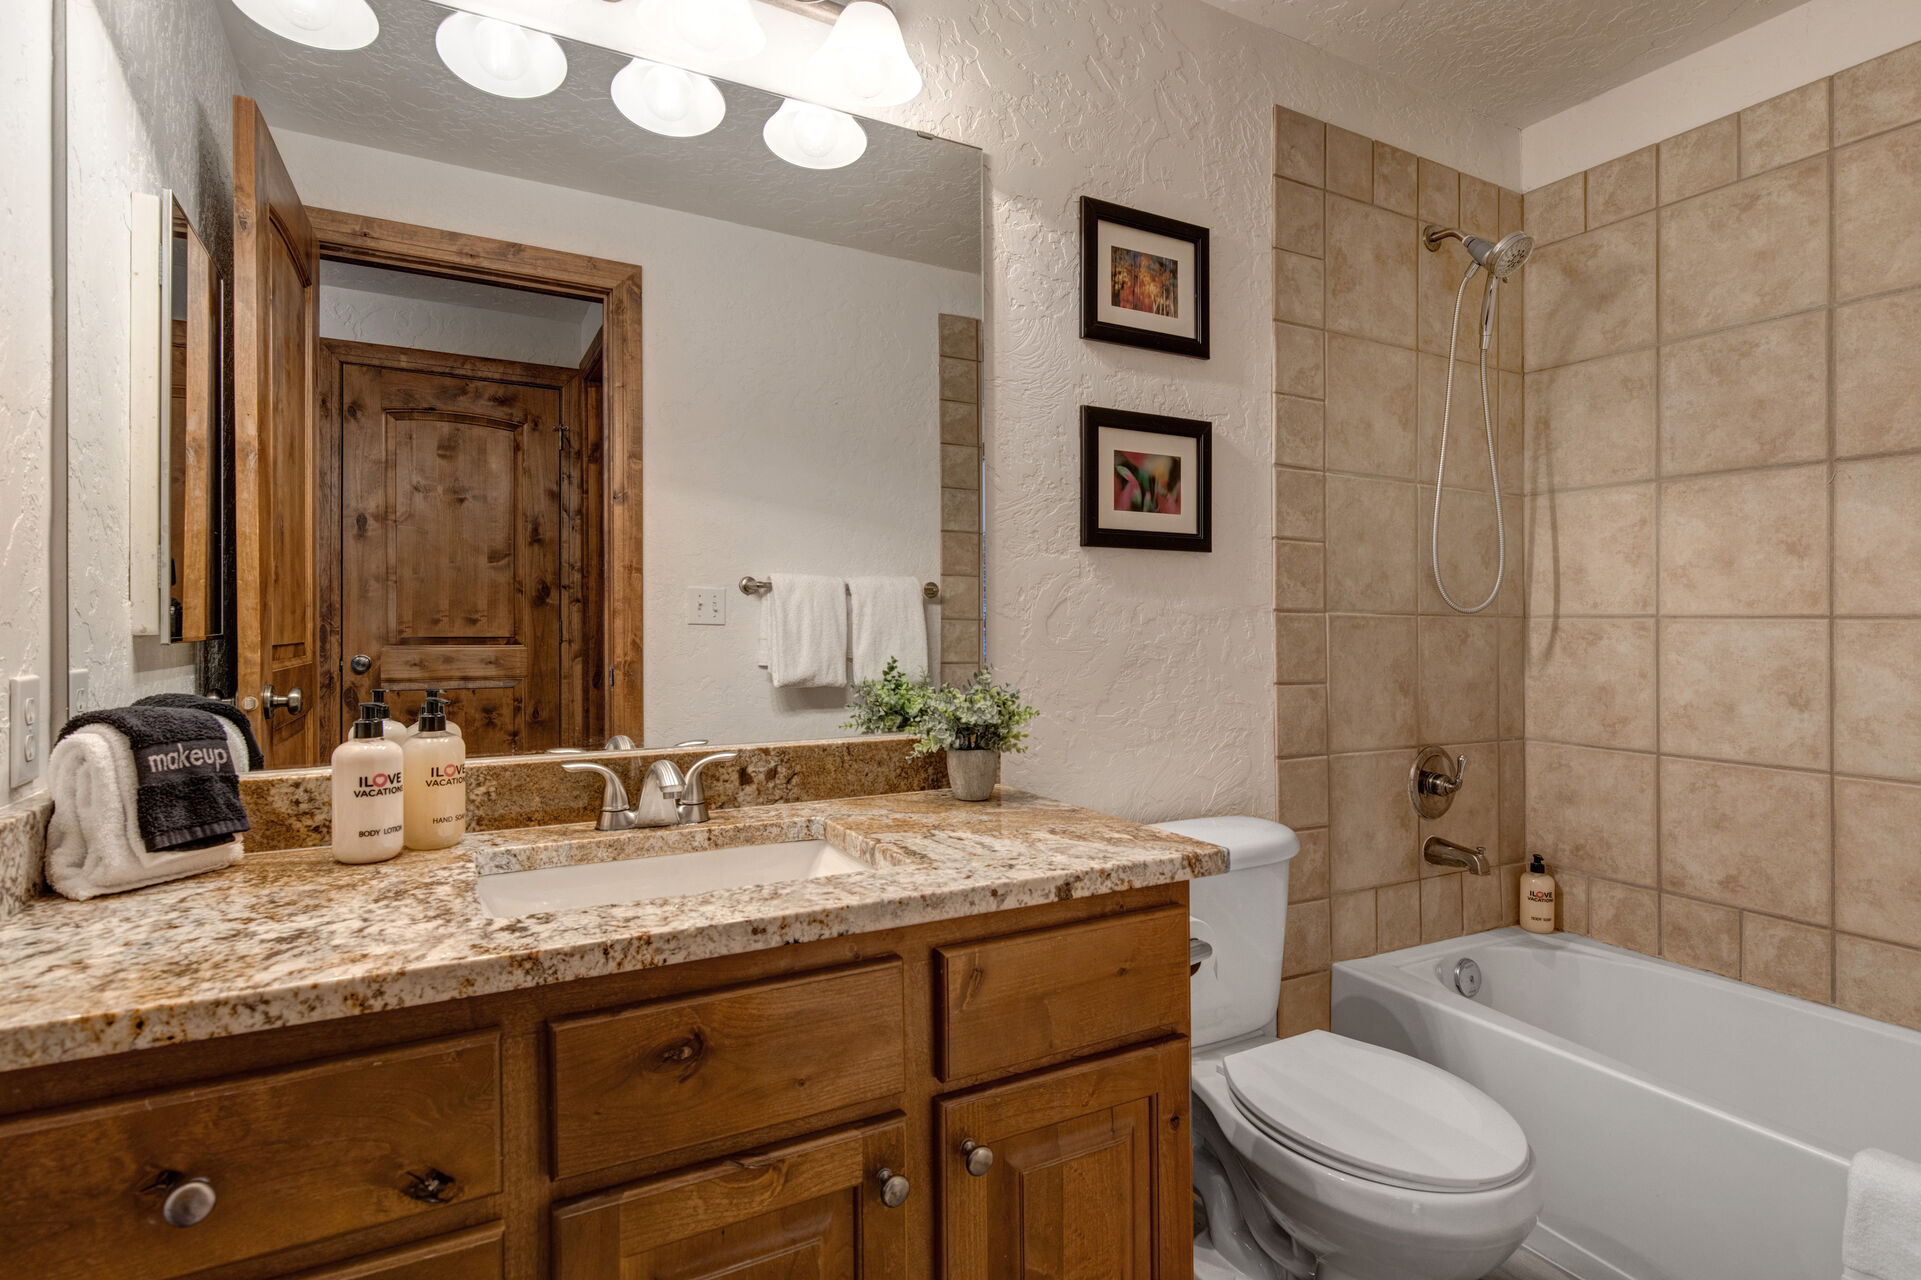 Full Shared Bath with a Granite Countertop Vanity and a Tub/Shower Combo